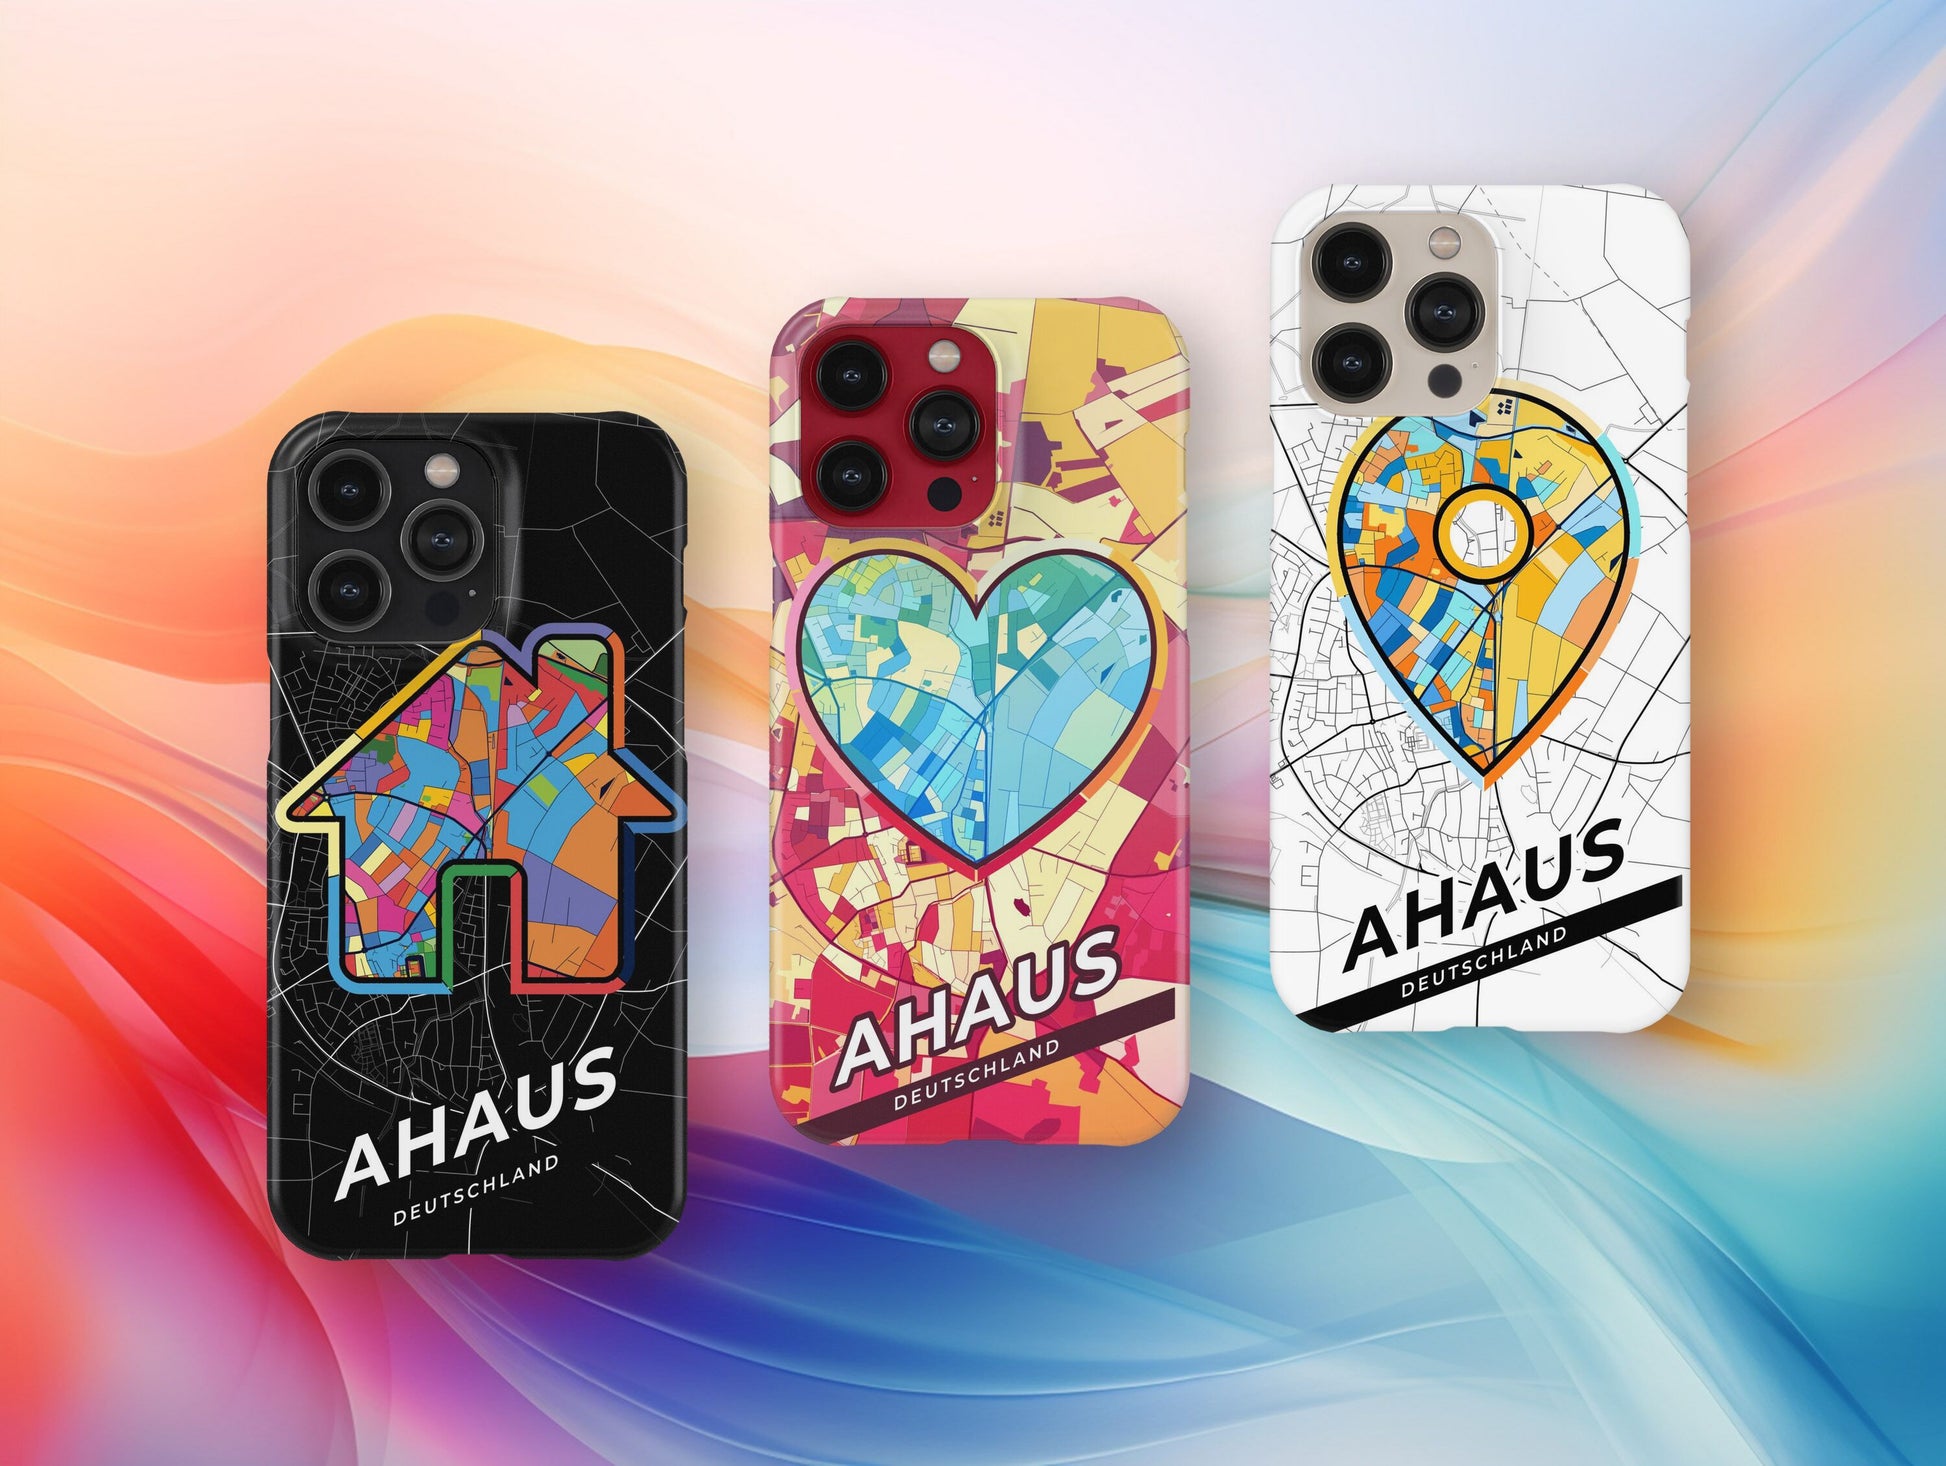 Ahaus Deutschland slim phone case with colorful icon. Birthday, wedding or housewarming gift. Couple match cases.